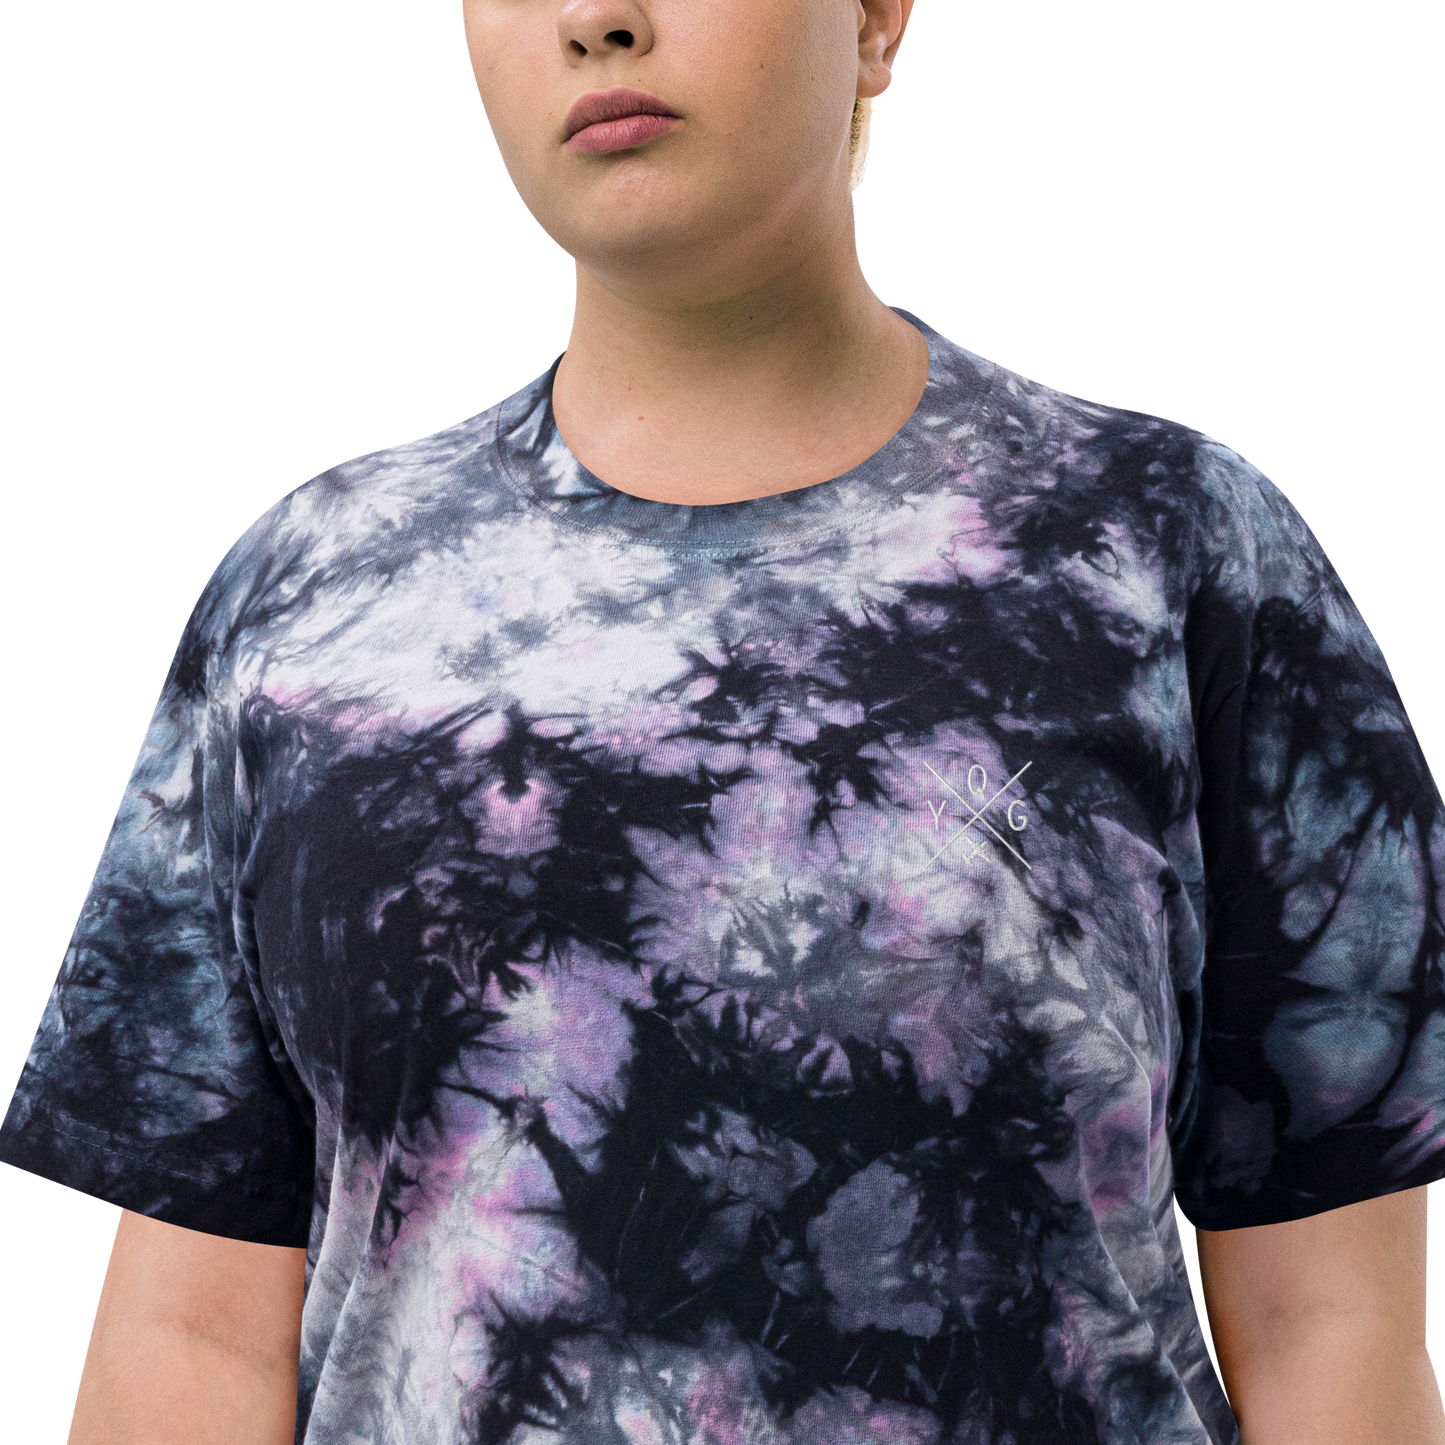 YHM Designs - YQG Windsor Oversized Tie-Dye T-Shirt - Crossed-X Design with Airport Code and Vintage Propliner - White Embroidery - Image 07